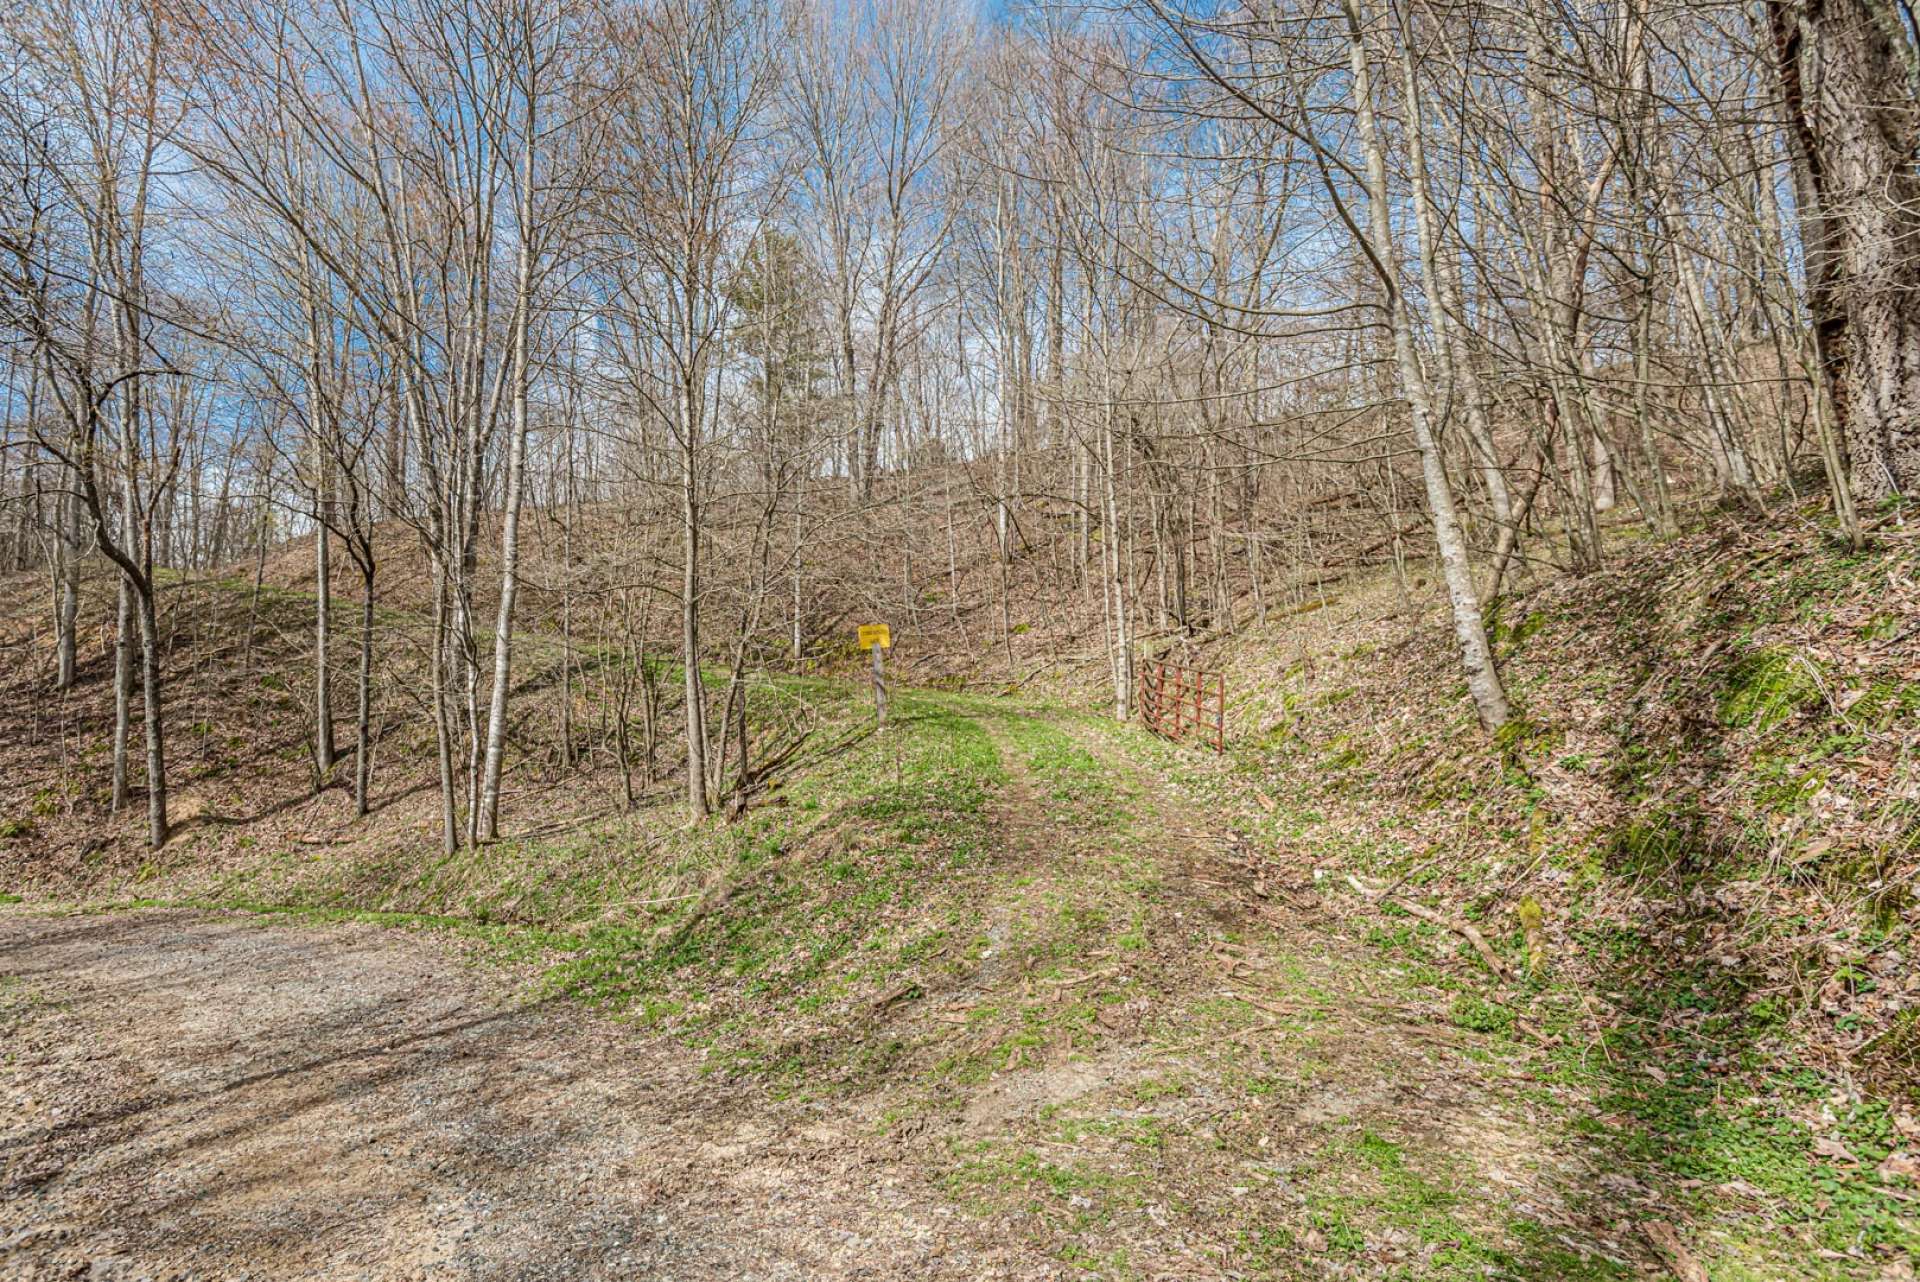 Located in River Breeze Estates, a well established community where New River access and picnic area are certainly attractive features of this almost unrestricted acreage in North West Ashe County.